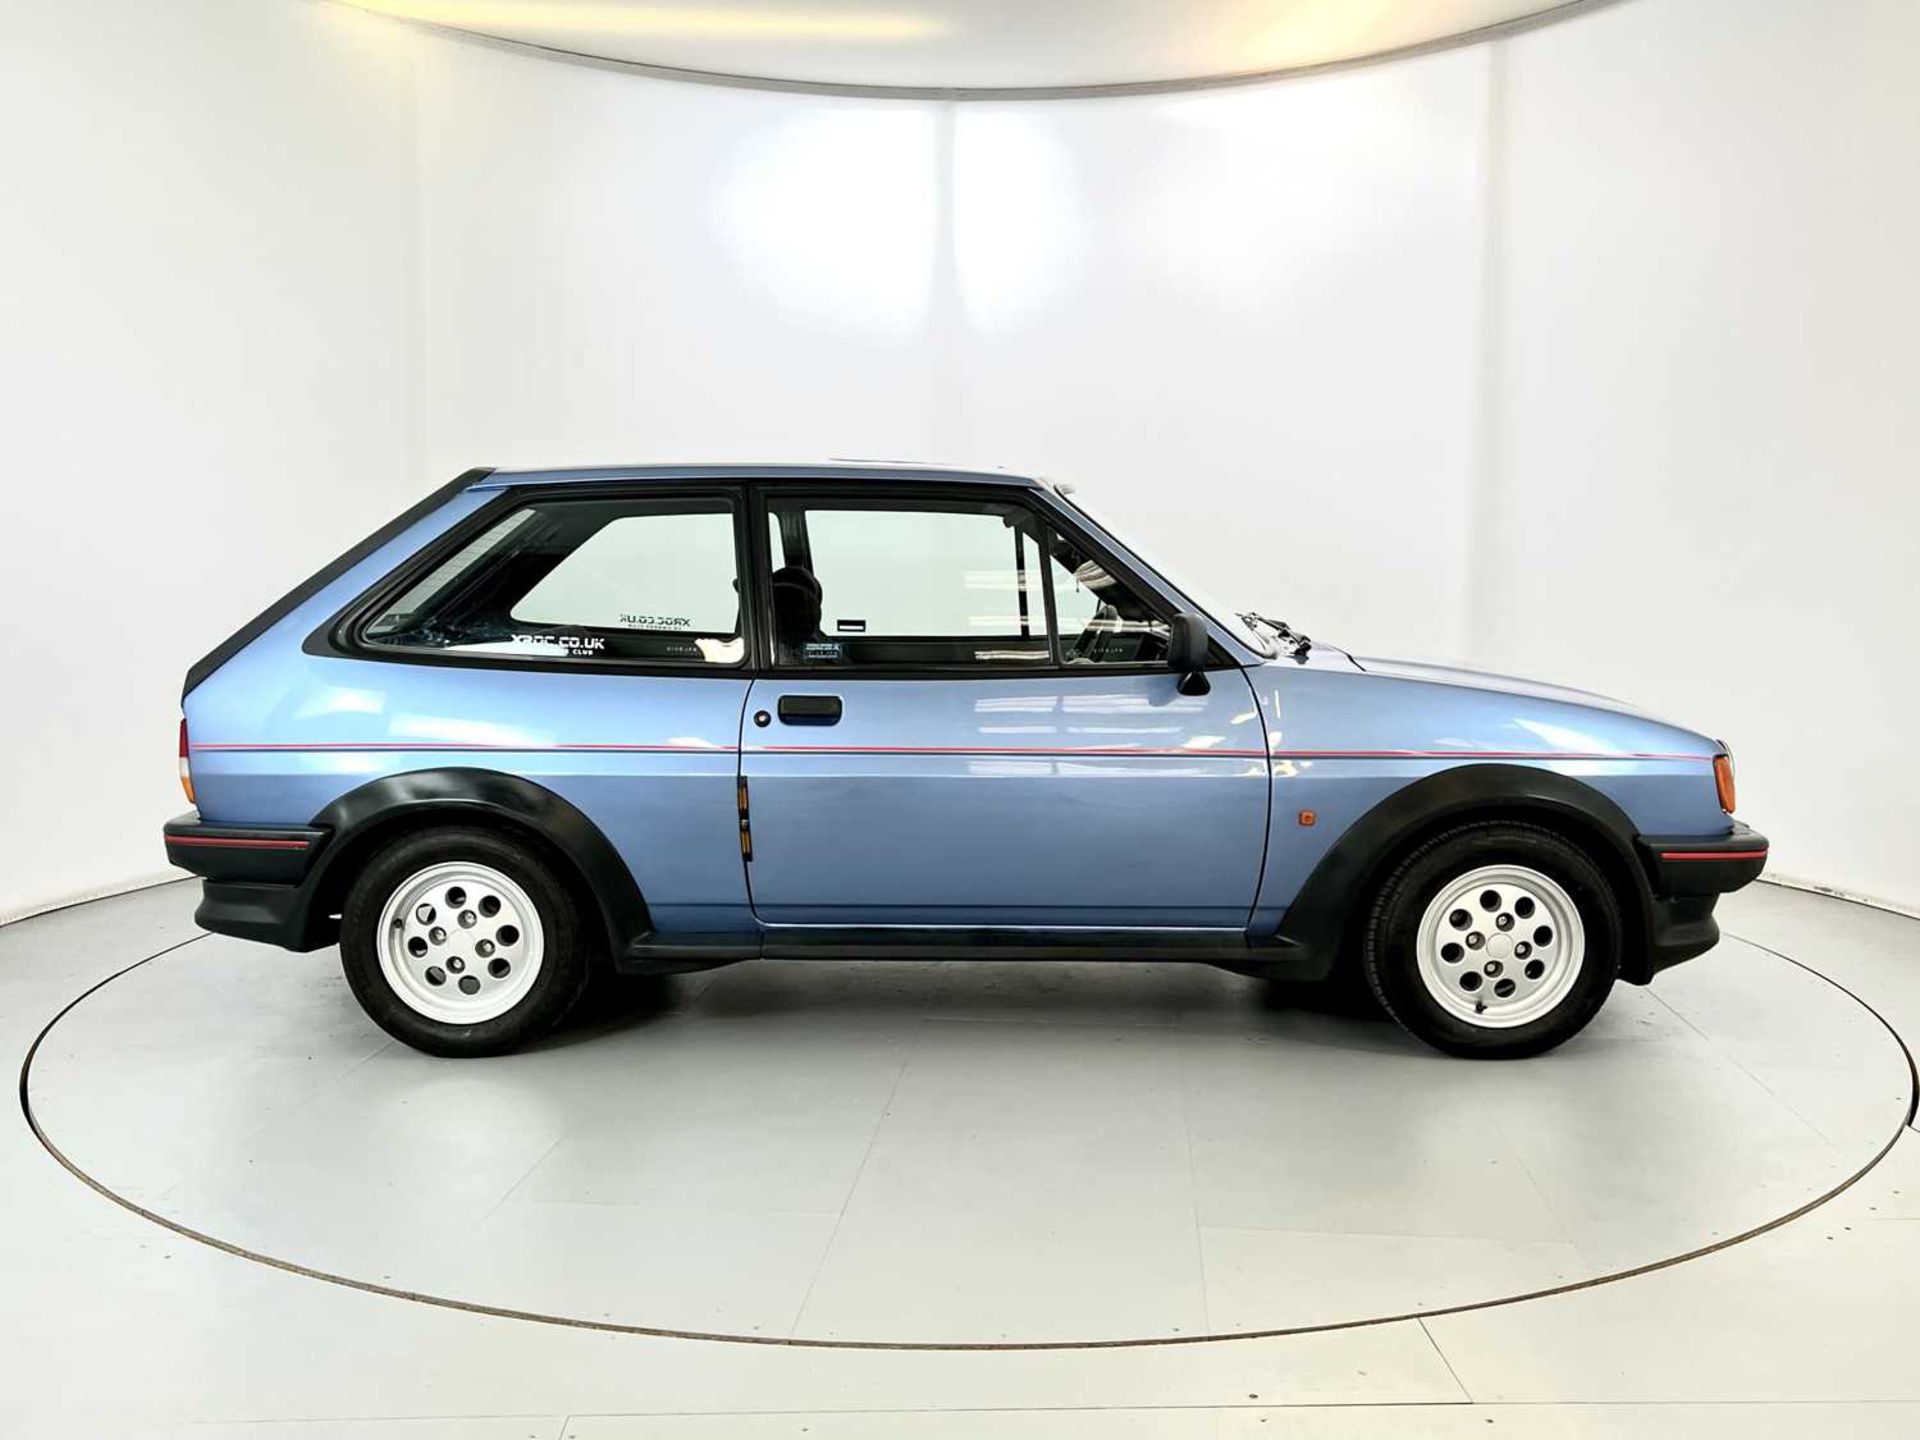 1986 Ford Fiesta XR2 - Image 11 of 33